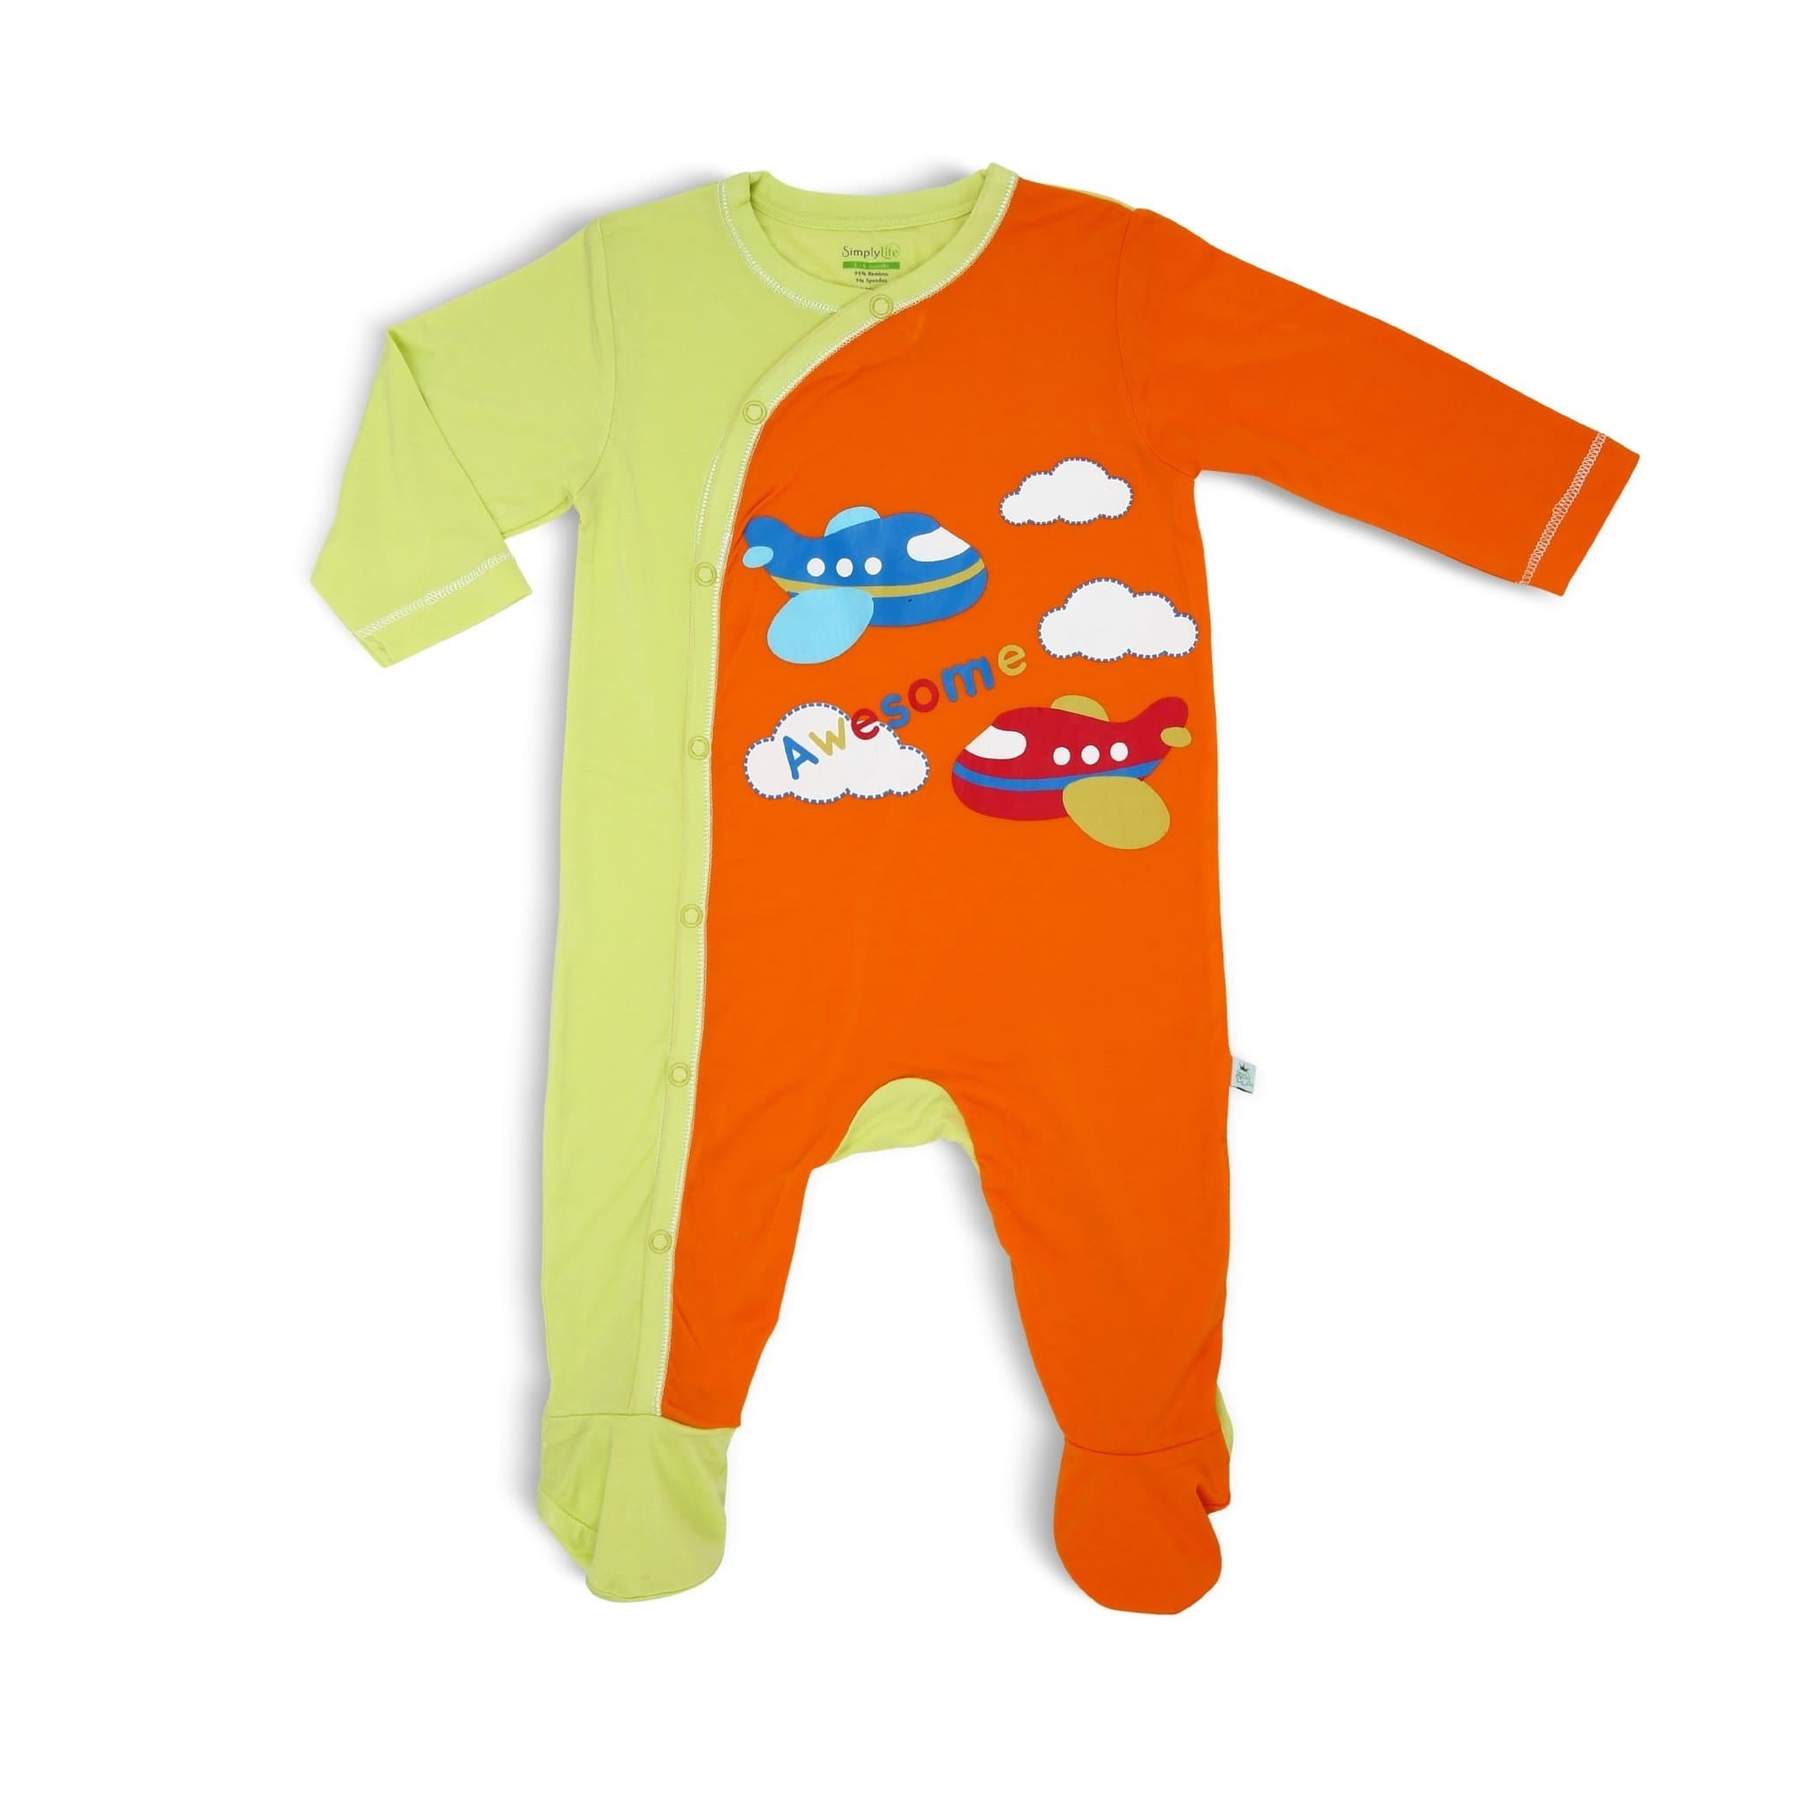 baby-fair Simply Life (Aeroplane) Boy - Side Snap Button Sleepsuit with Footie and Spot Print